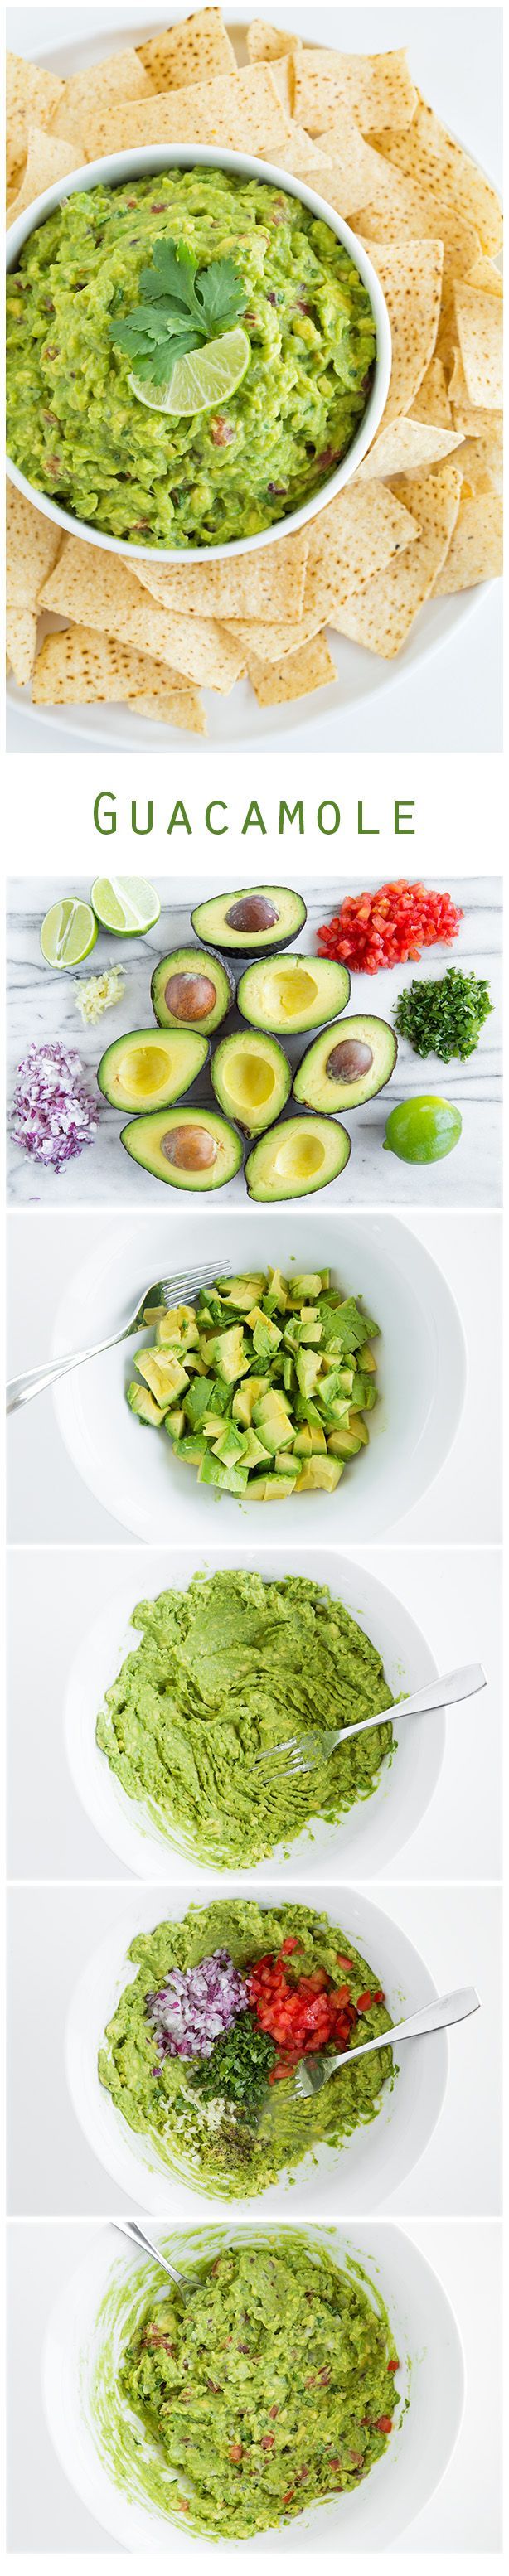 Guacamole – the only guacamole recipe youll ever need! LOVE it!